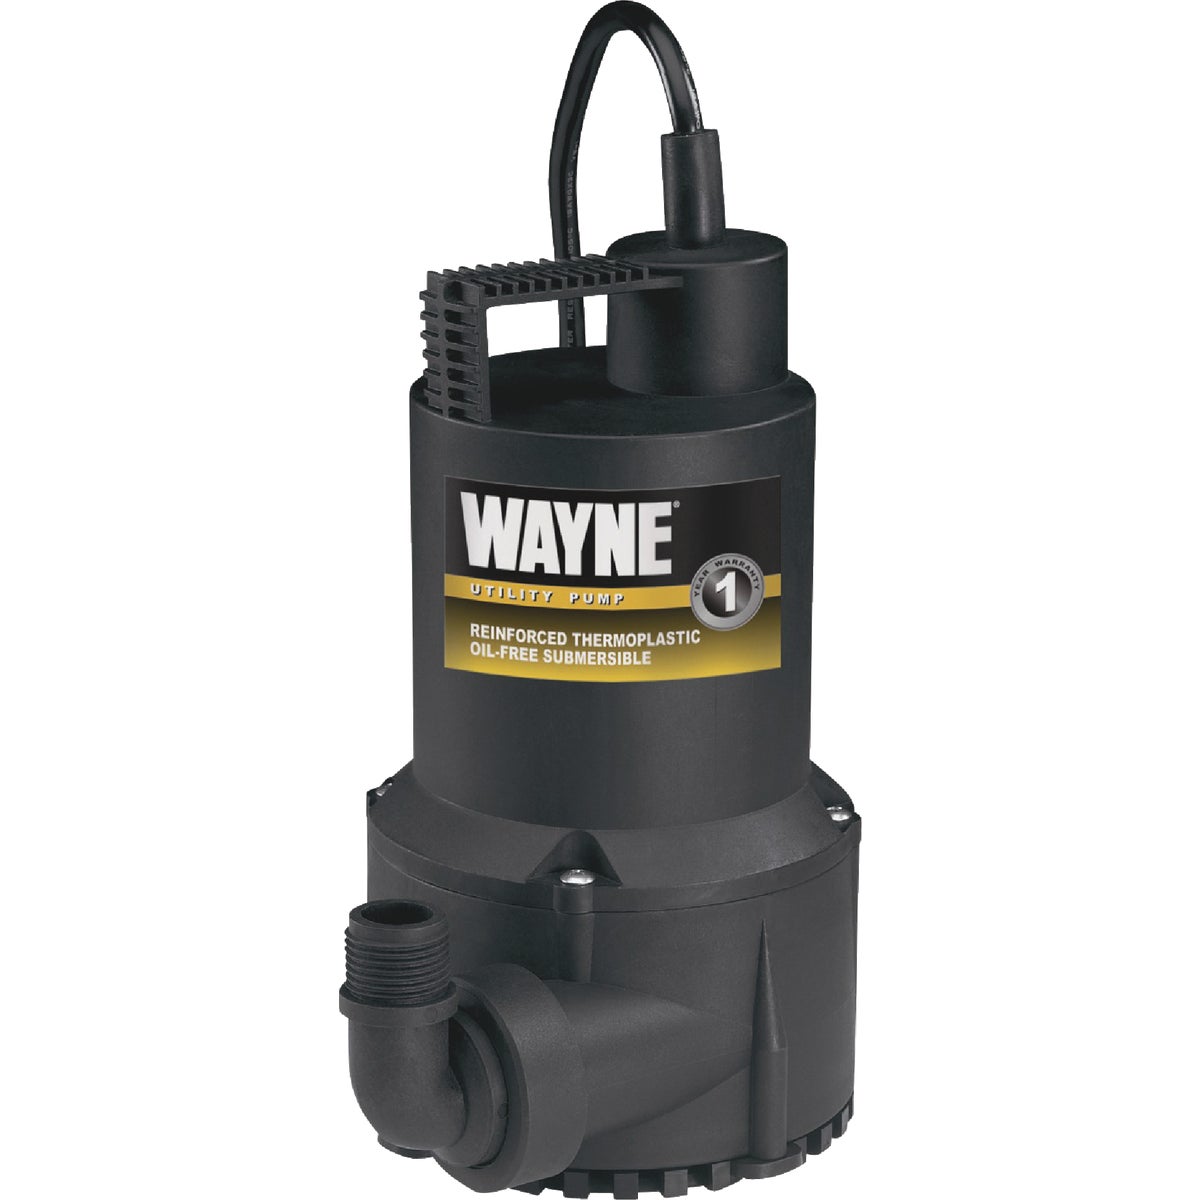 Item 450545, Portable electric water removal pump.